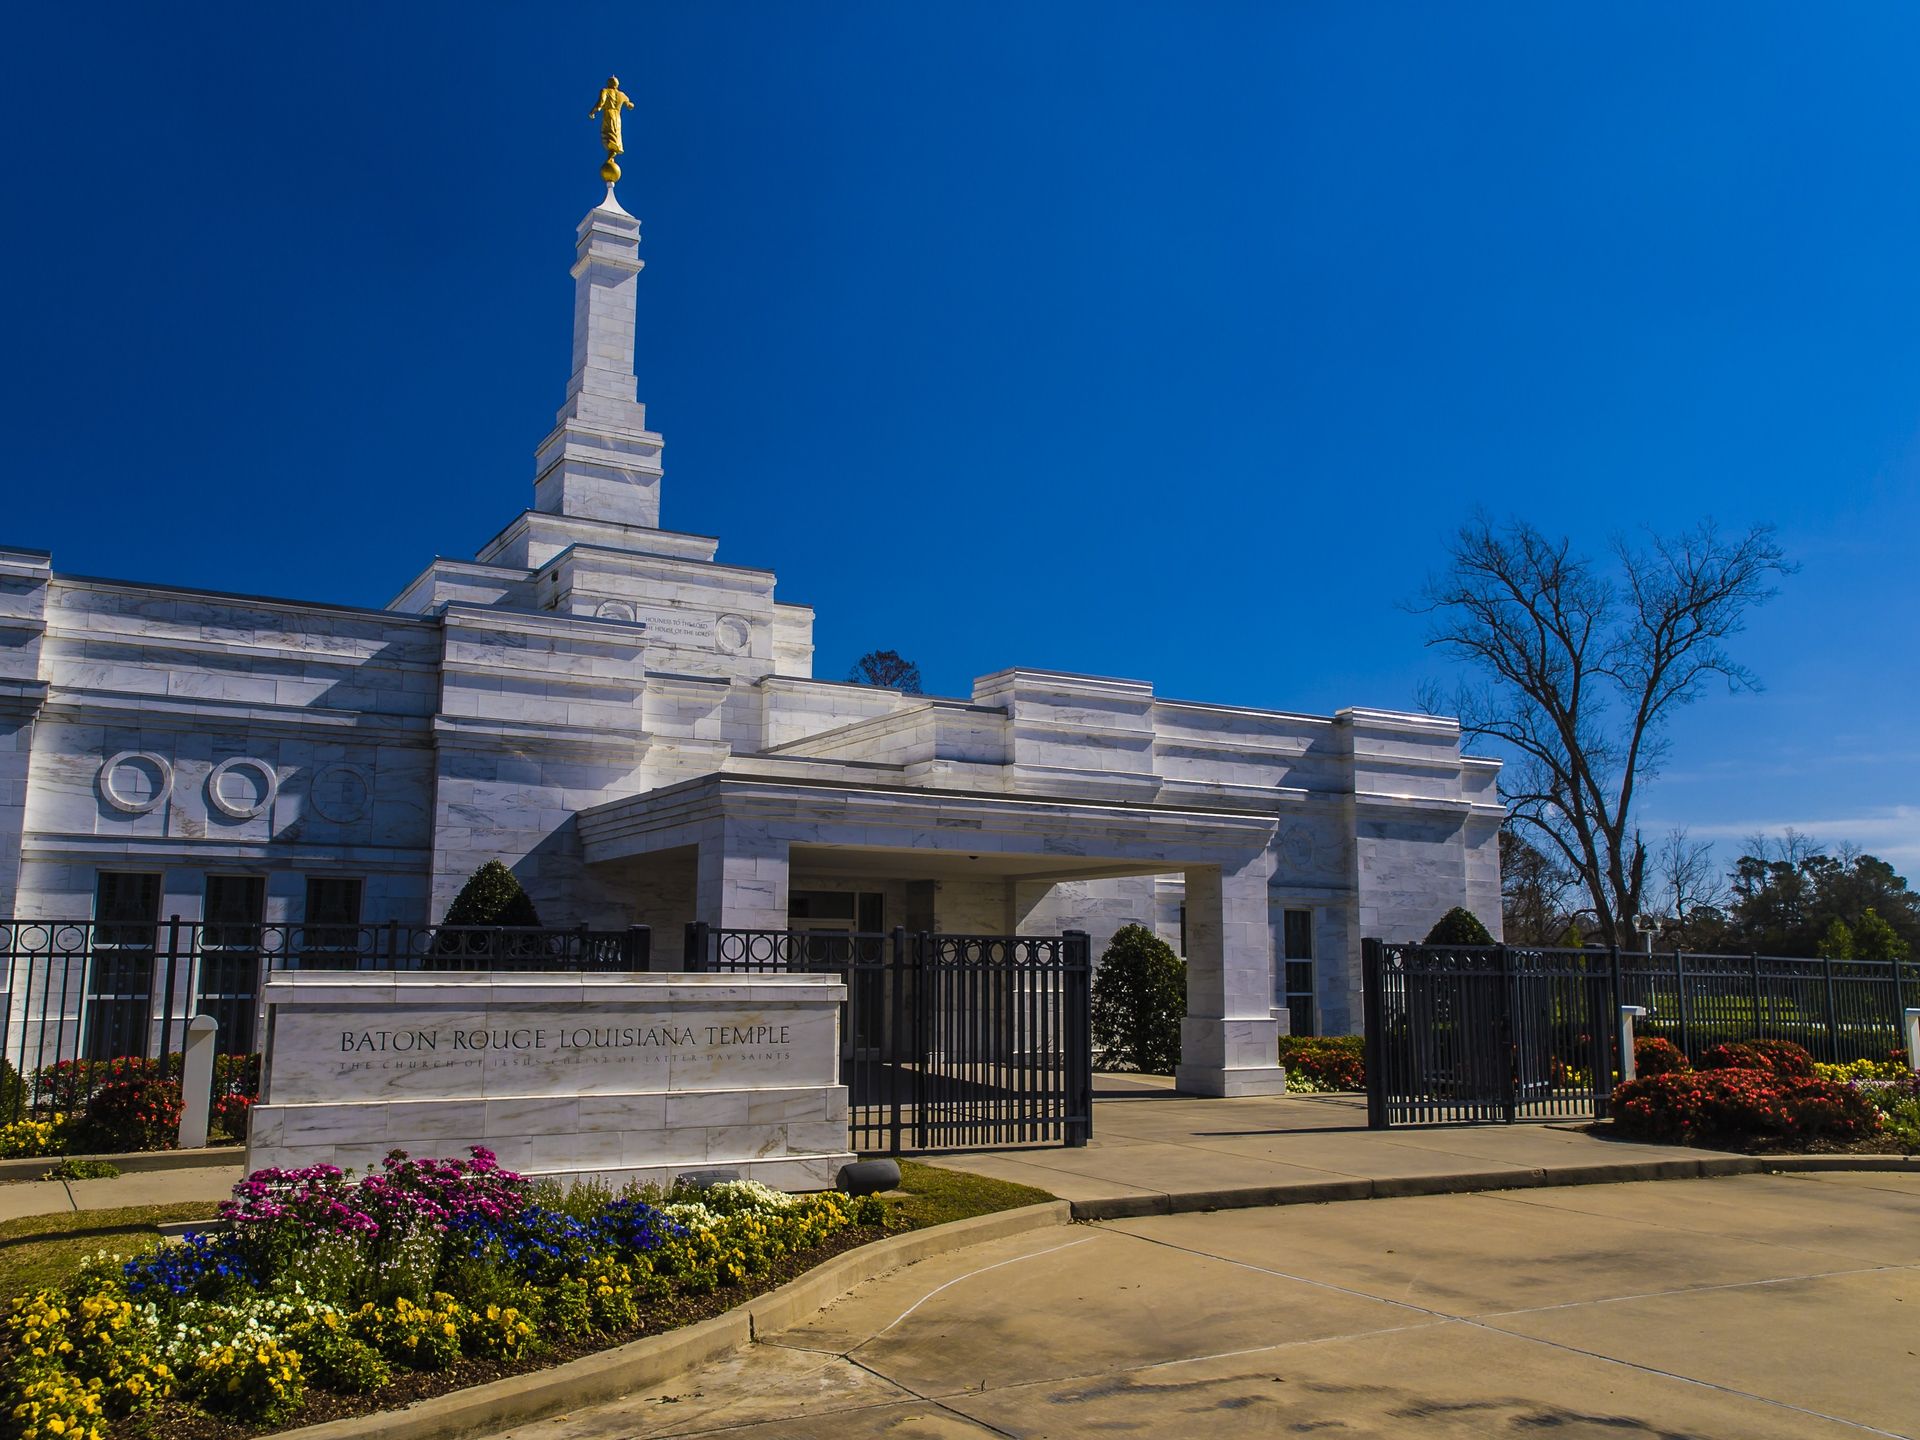 The main entrance to the Baton Rouge Louisiana Temple welcomes members.